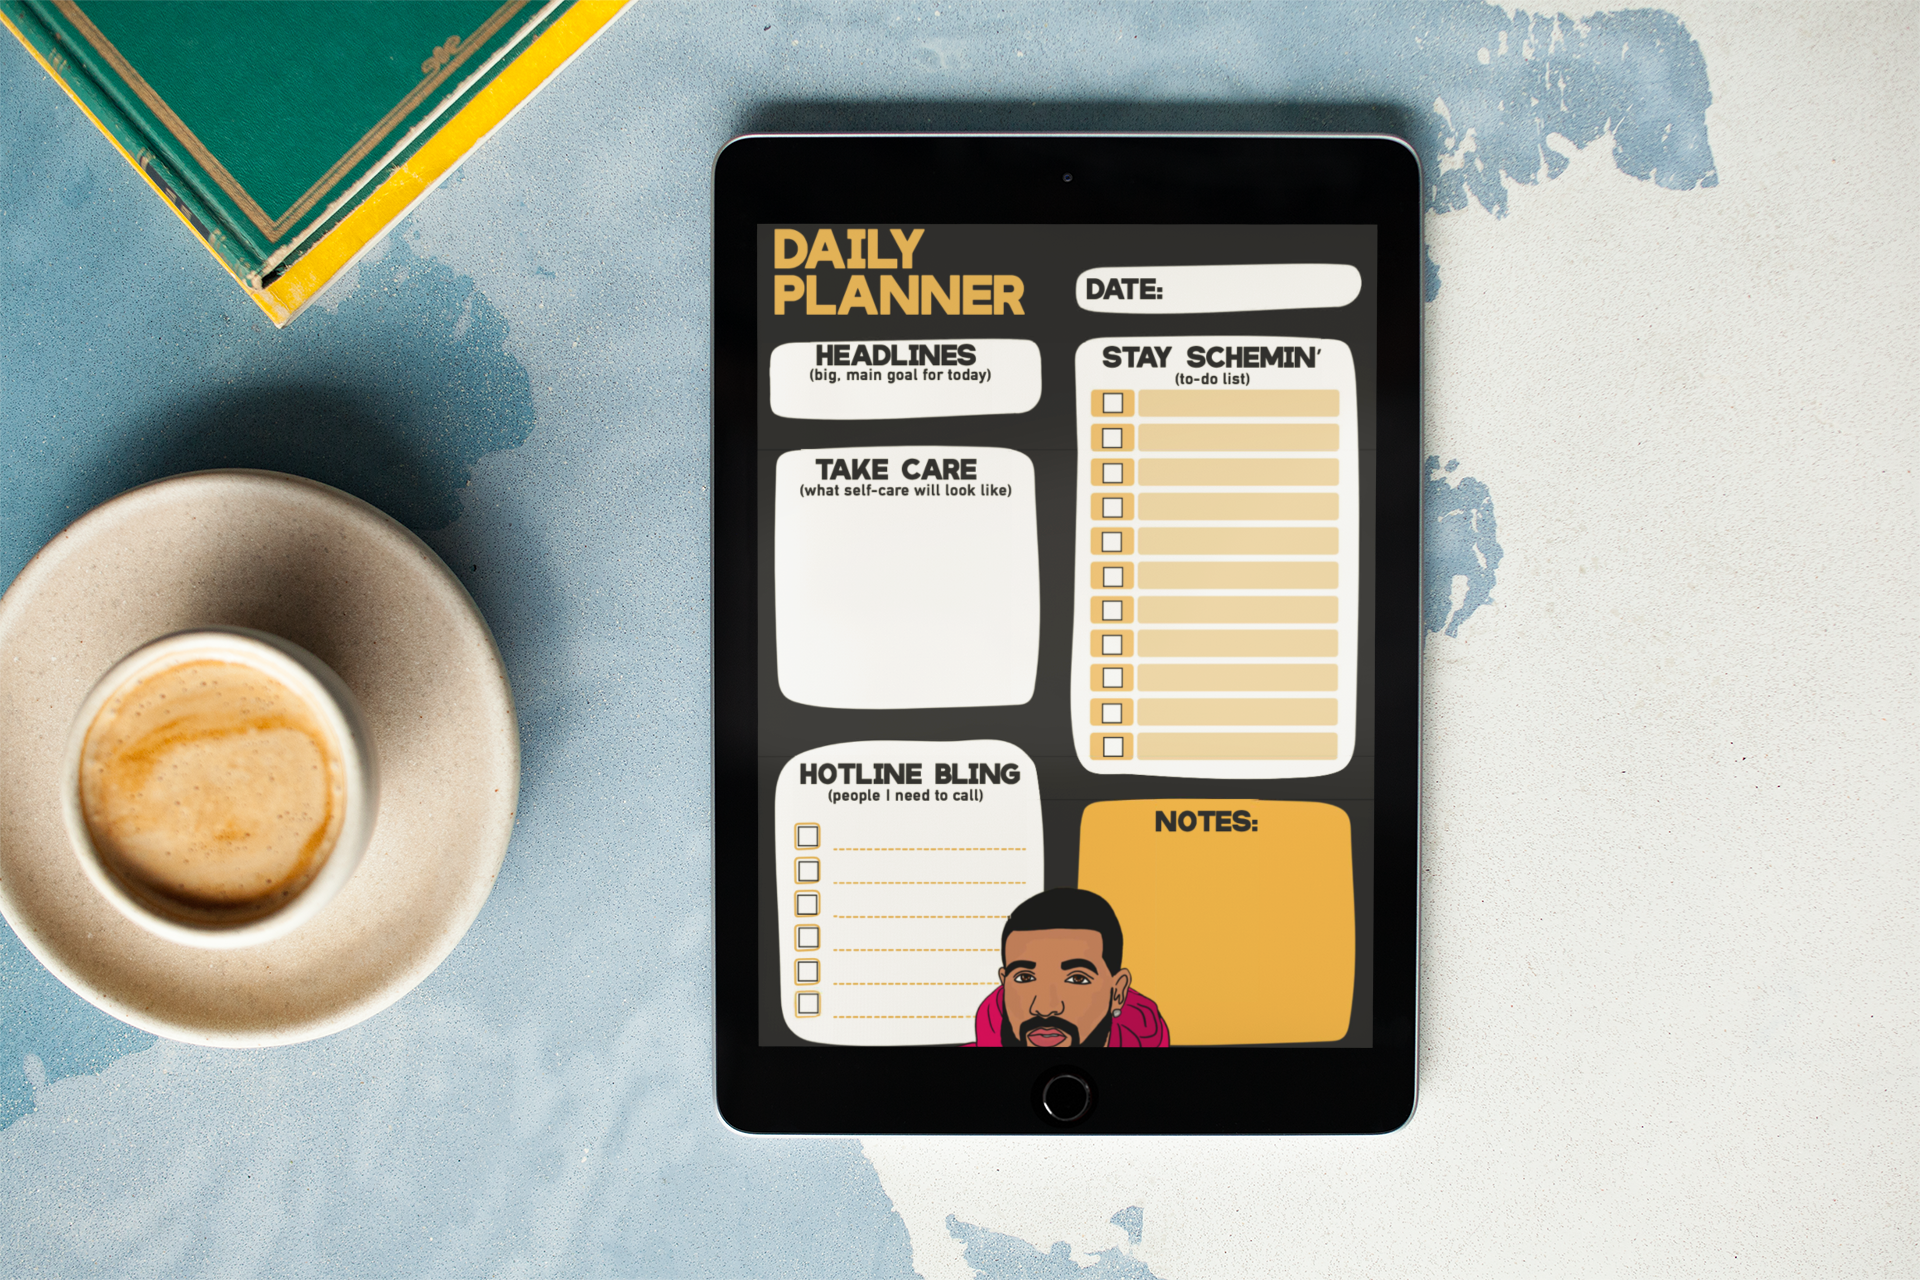 Drake-inspired Digital Daily Planner | Printable | Self-Care Daily Planner | Boost Productivity | Easy to Use